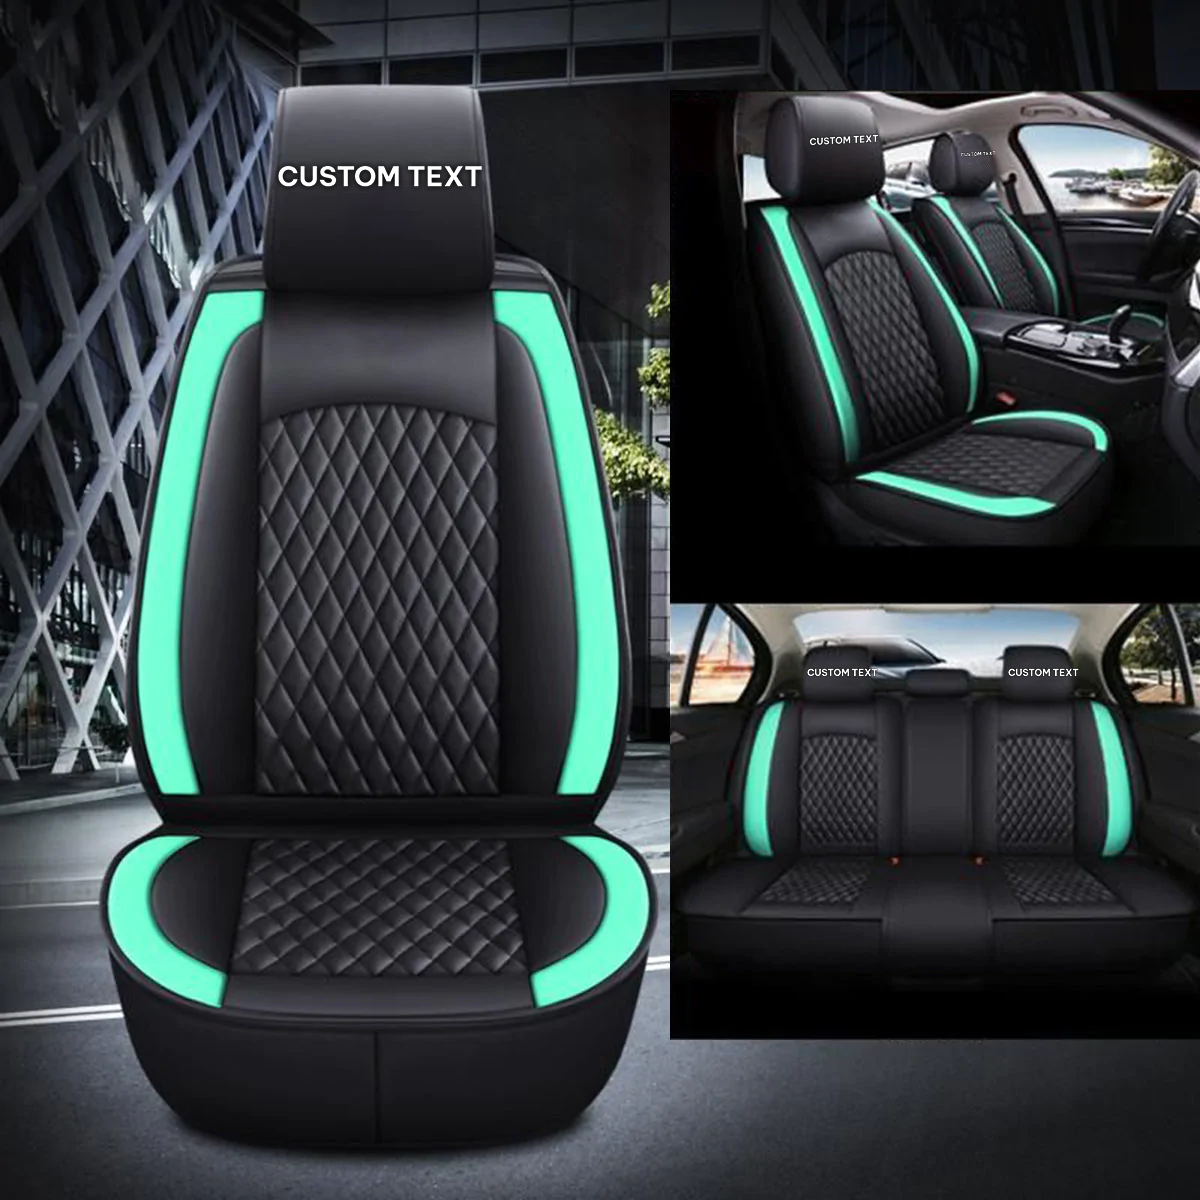 Custom Text For Seat Covers 5 Seats Full Set, Custom Fit For Your Cars, Leatherette Automotive Seat Cushion Protector Universal Fit, Vehicle Auto Interior Decor AC13988